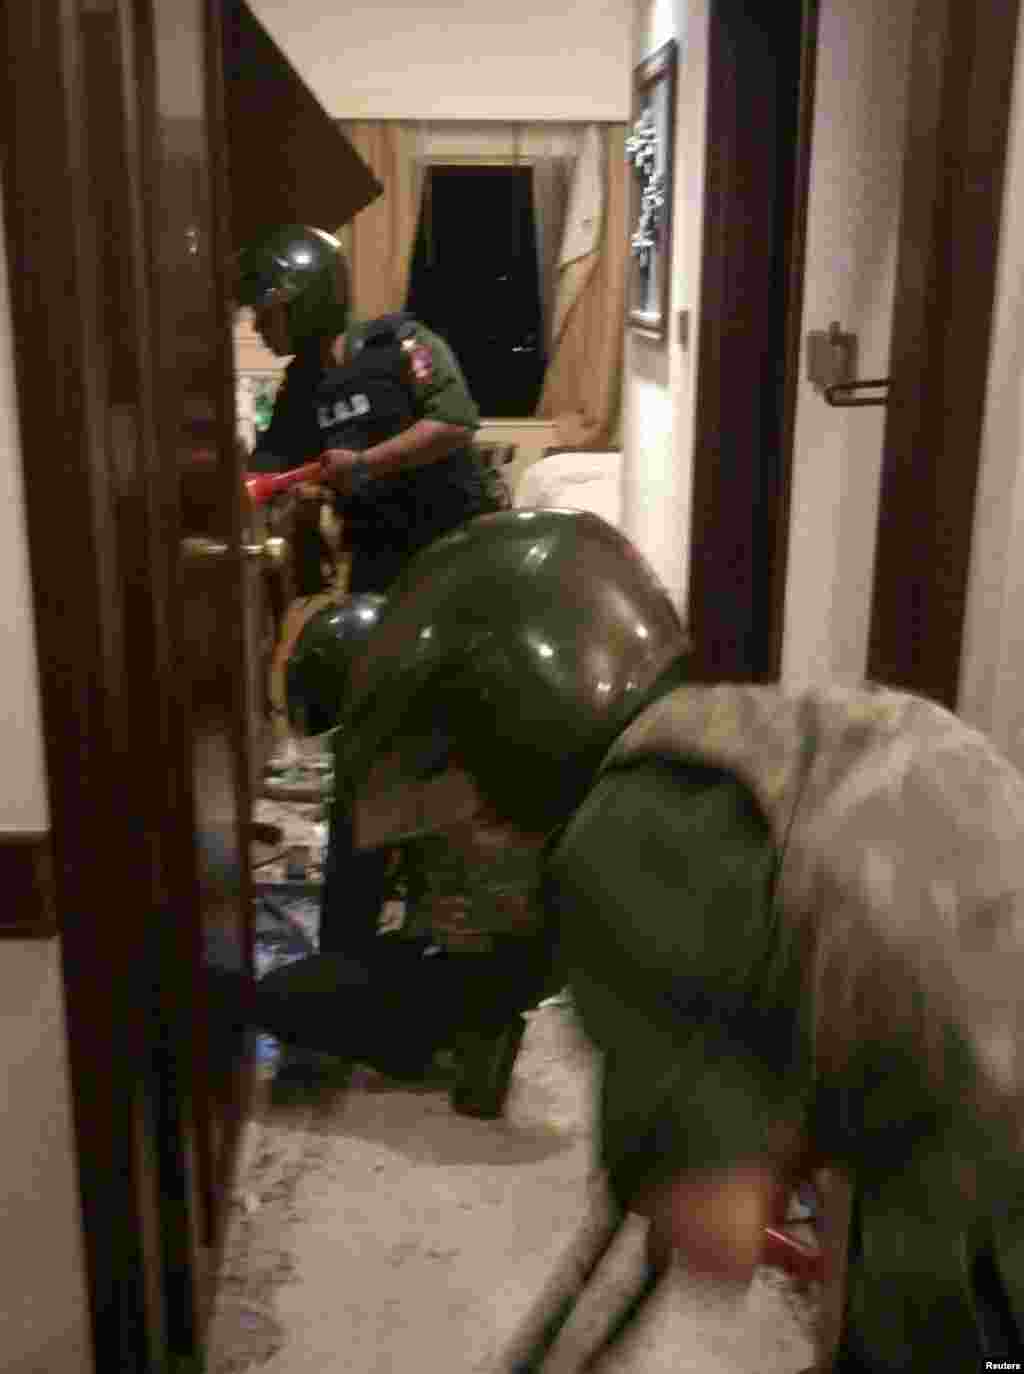 Soldiers inspect a room where an explosion occurred at Traders Hotel in central Rangoon, Burma, Oct. 15, 2013. 